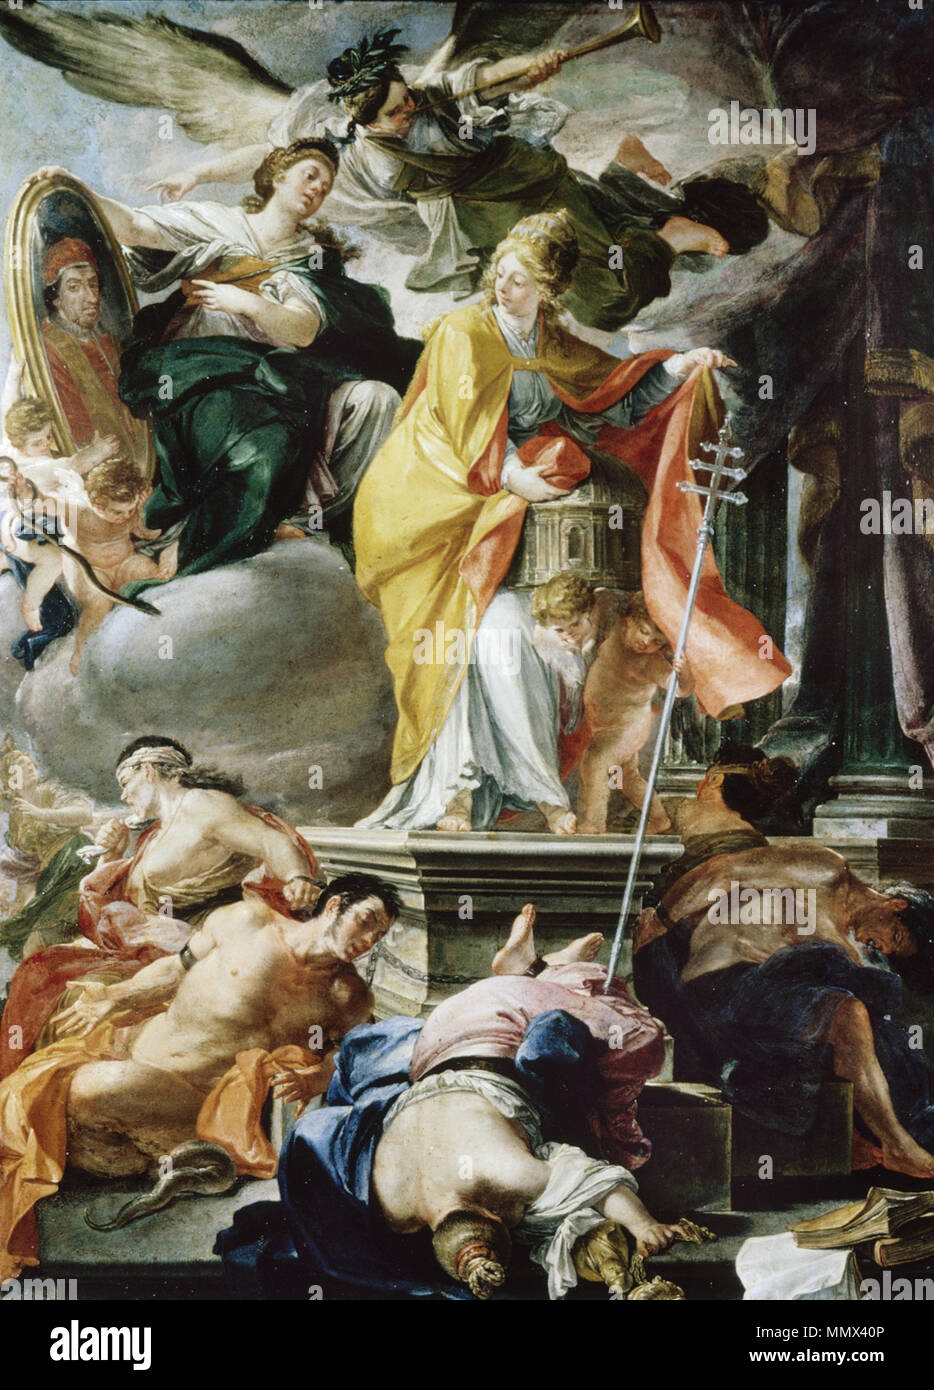 .  English: In this allegory, various symbolic motifs are brought together to express Clement XI's papacy (r. 1700-1721) as an abstract concept. The standing woman at center wearing the papal tiara is holding her cape in a protective manner over a little temple supported by angels. She may by an allegory of Religion protecting the Roman Church. To the base, on which she stands like a column, are chained different agonized figures symbolizing vices, an allusion to Protestants and Muslims. Above, Fame blows her horn while pointing to a portrait of the pontiff. The allegory as a whole is a portra Stock Photo